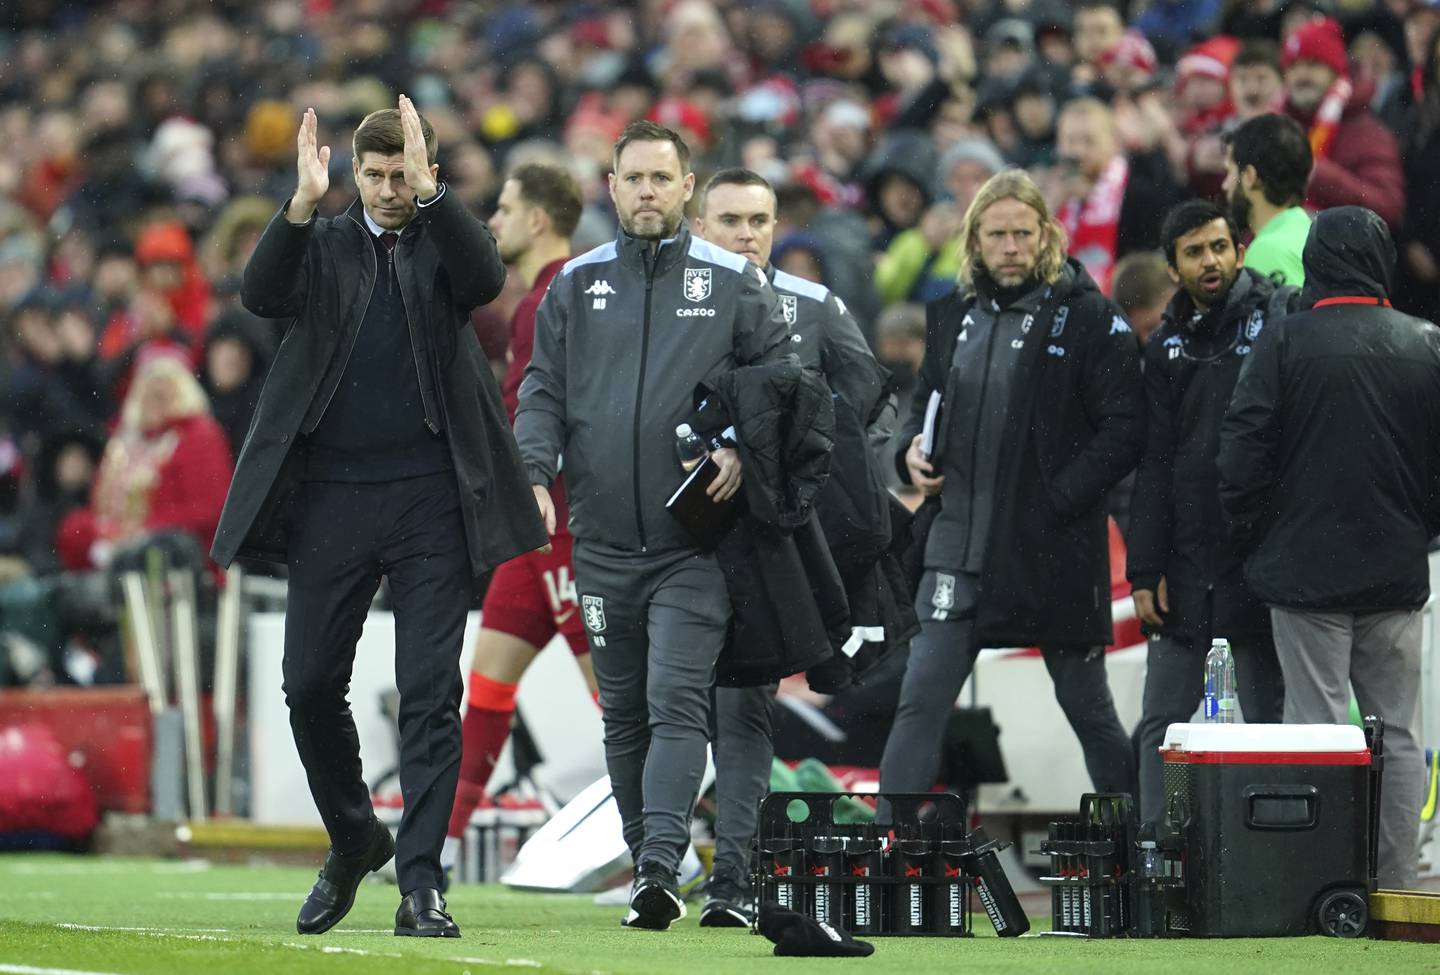 Aston Villa manager Steven Gerrard, left, before the Premier League match against Liverpool at Anfield in December, 2021. Liverpool won the game 1-0. AP